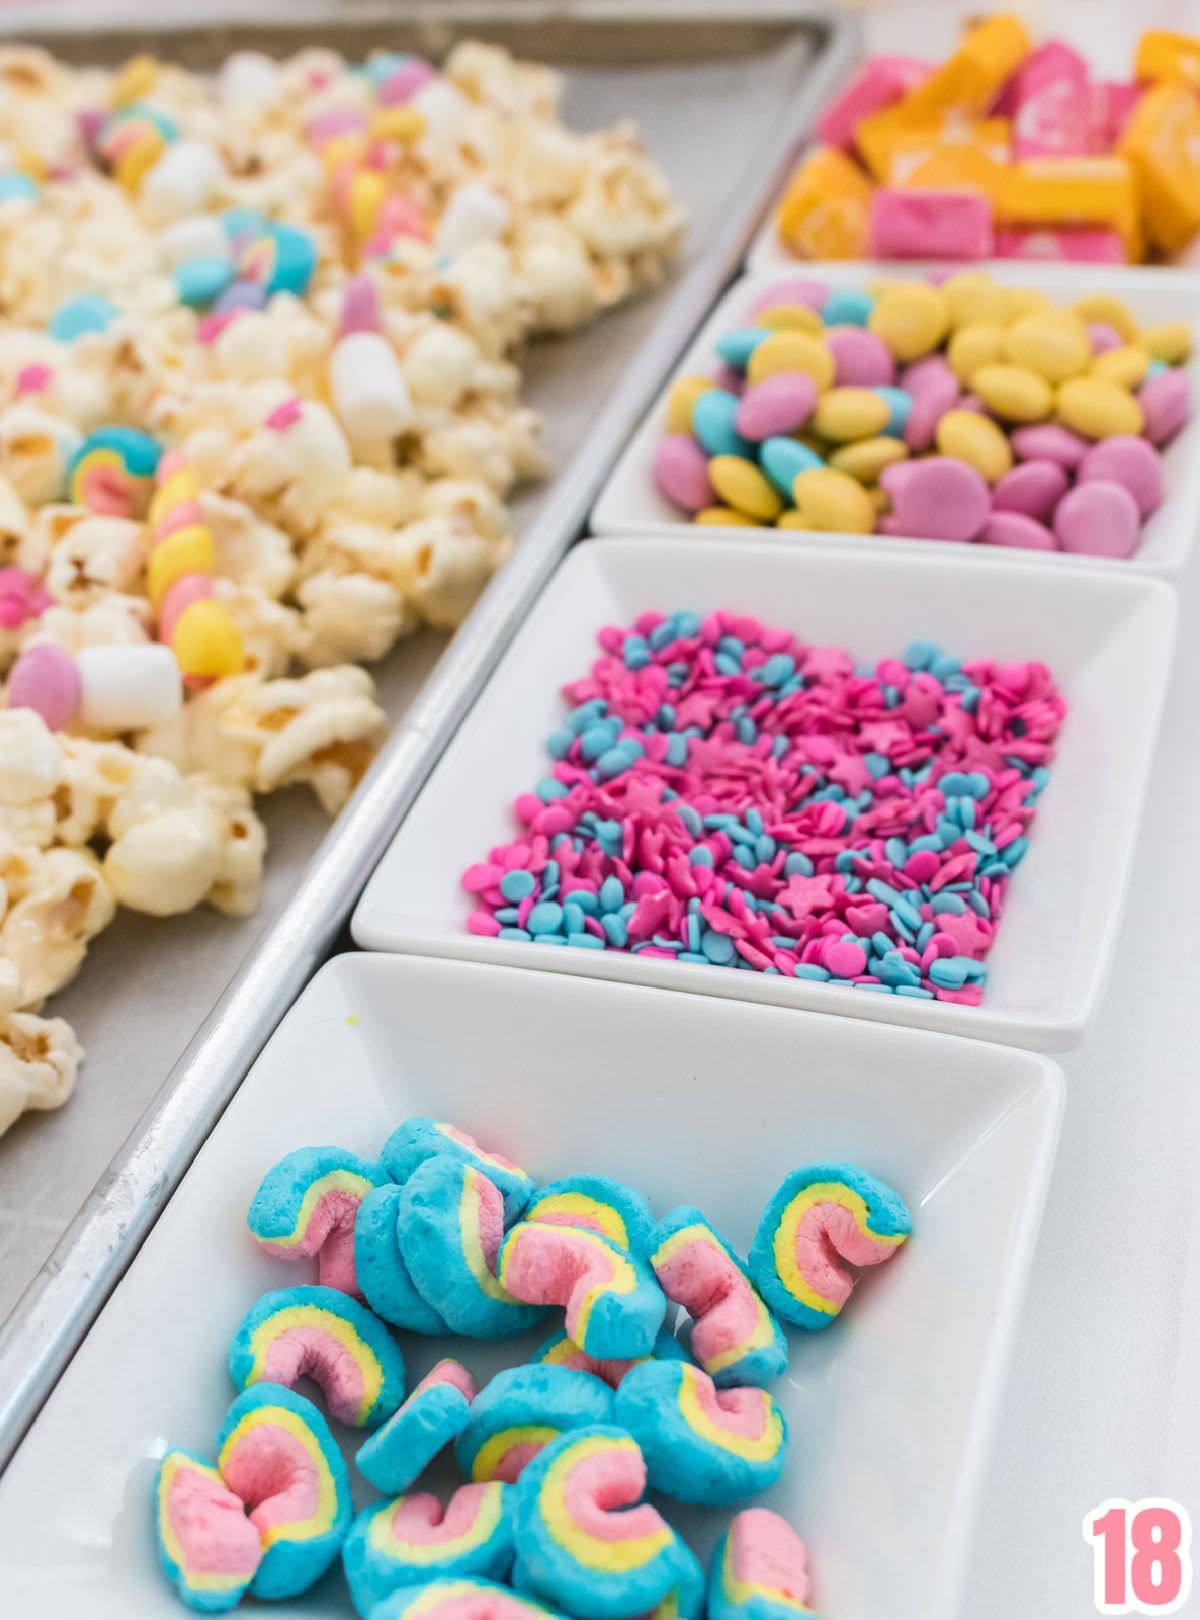 Closeup of the Candy Mix-ins used in the Unicorn Popcorn.